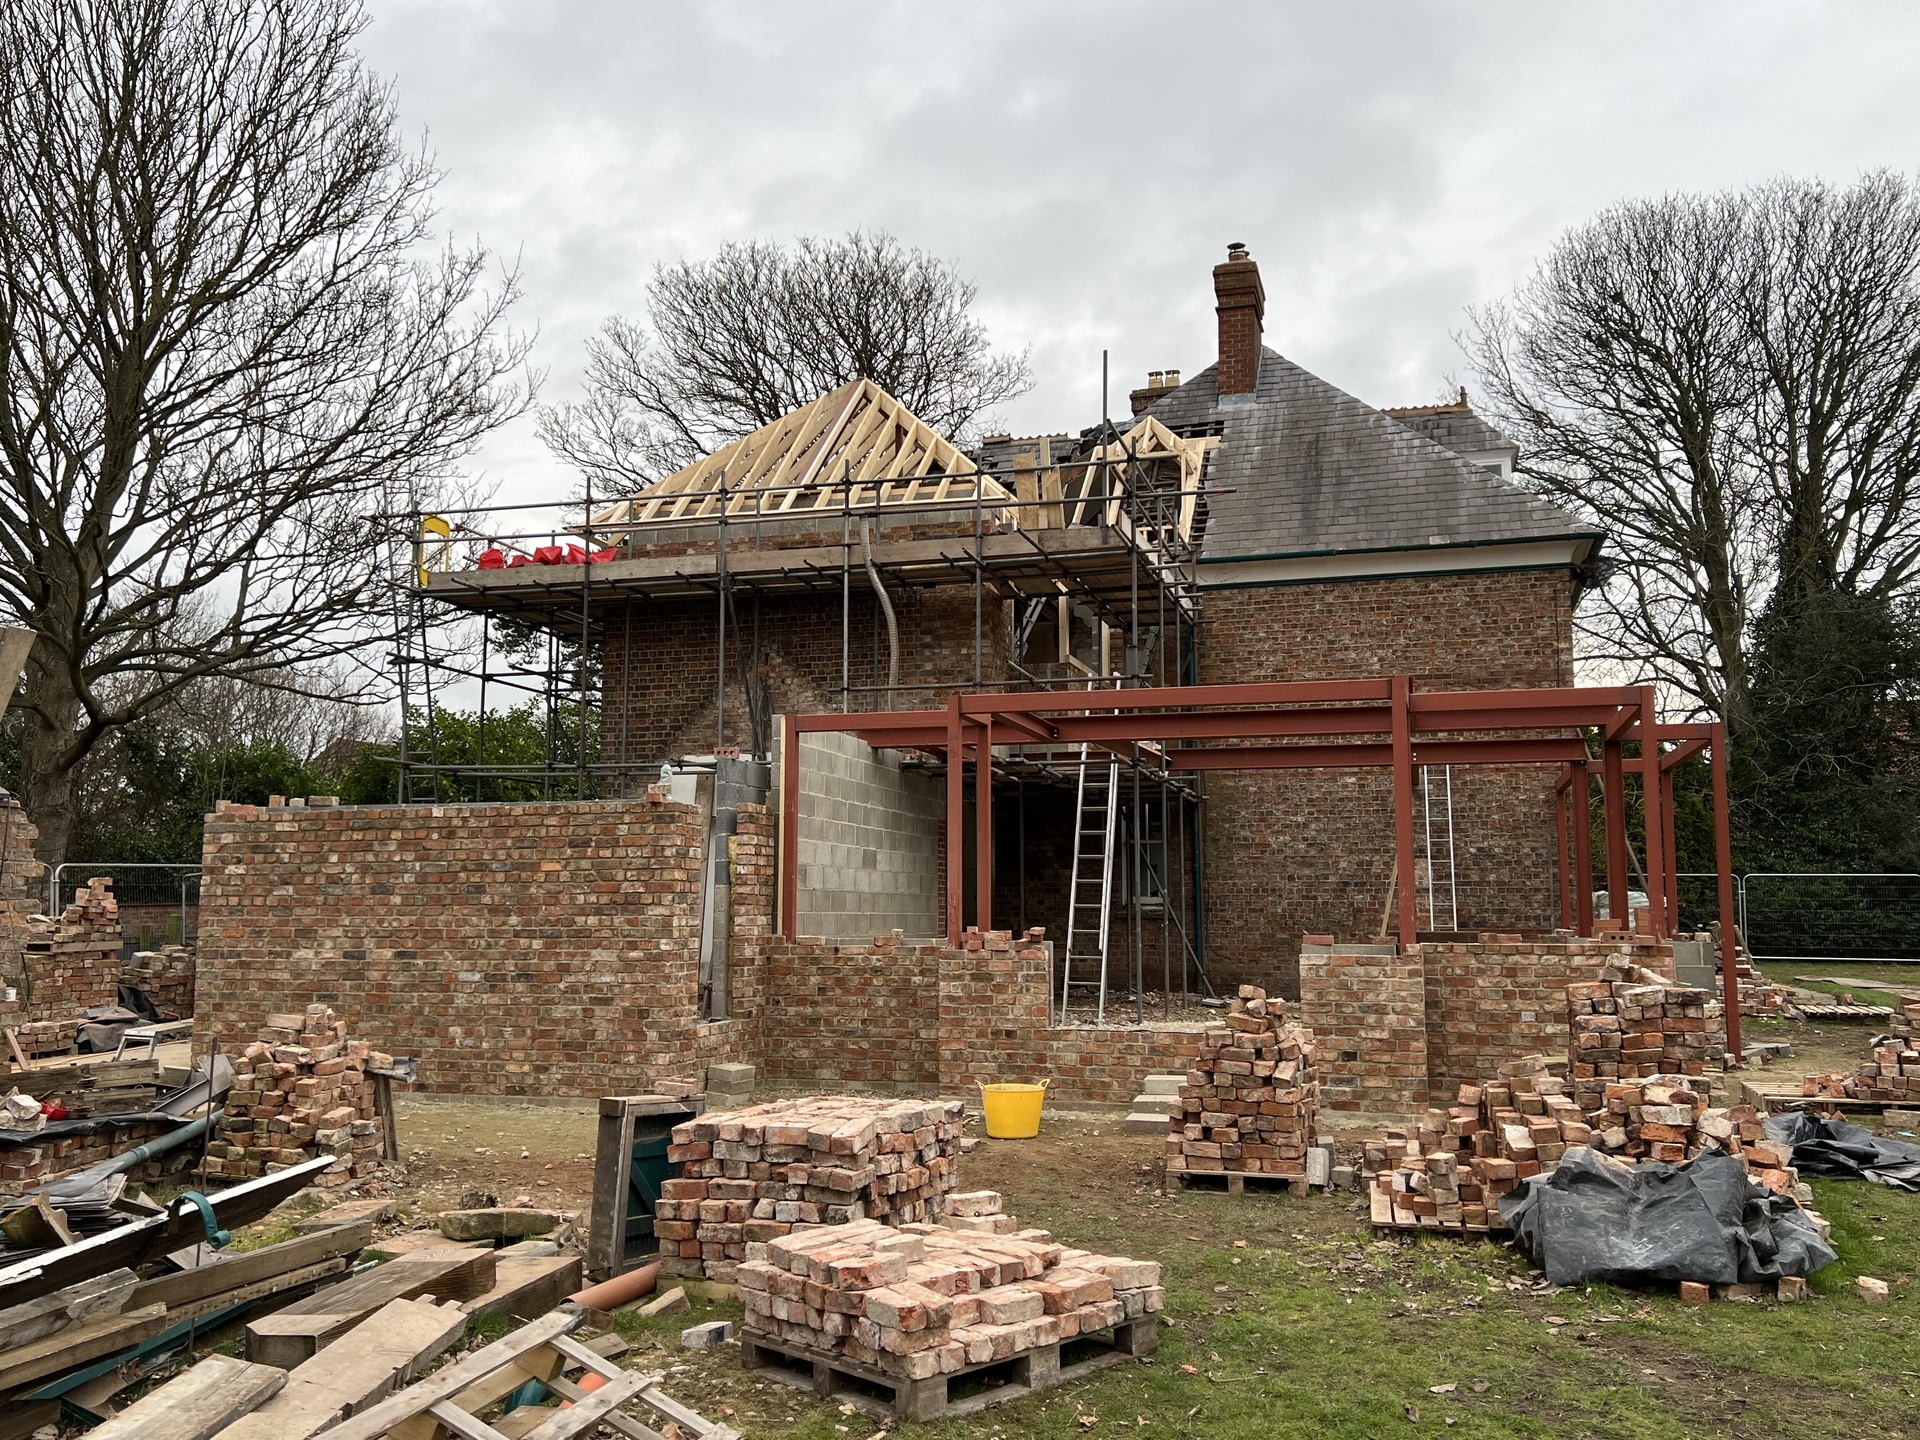 Construction of steelwork & external walls for new kitchen, dining & utility room